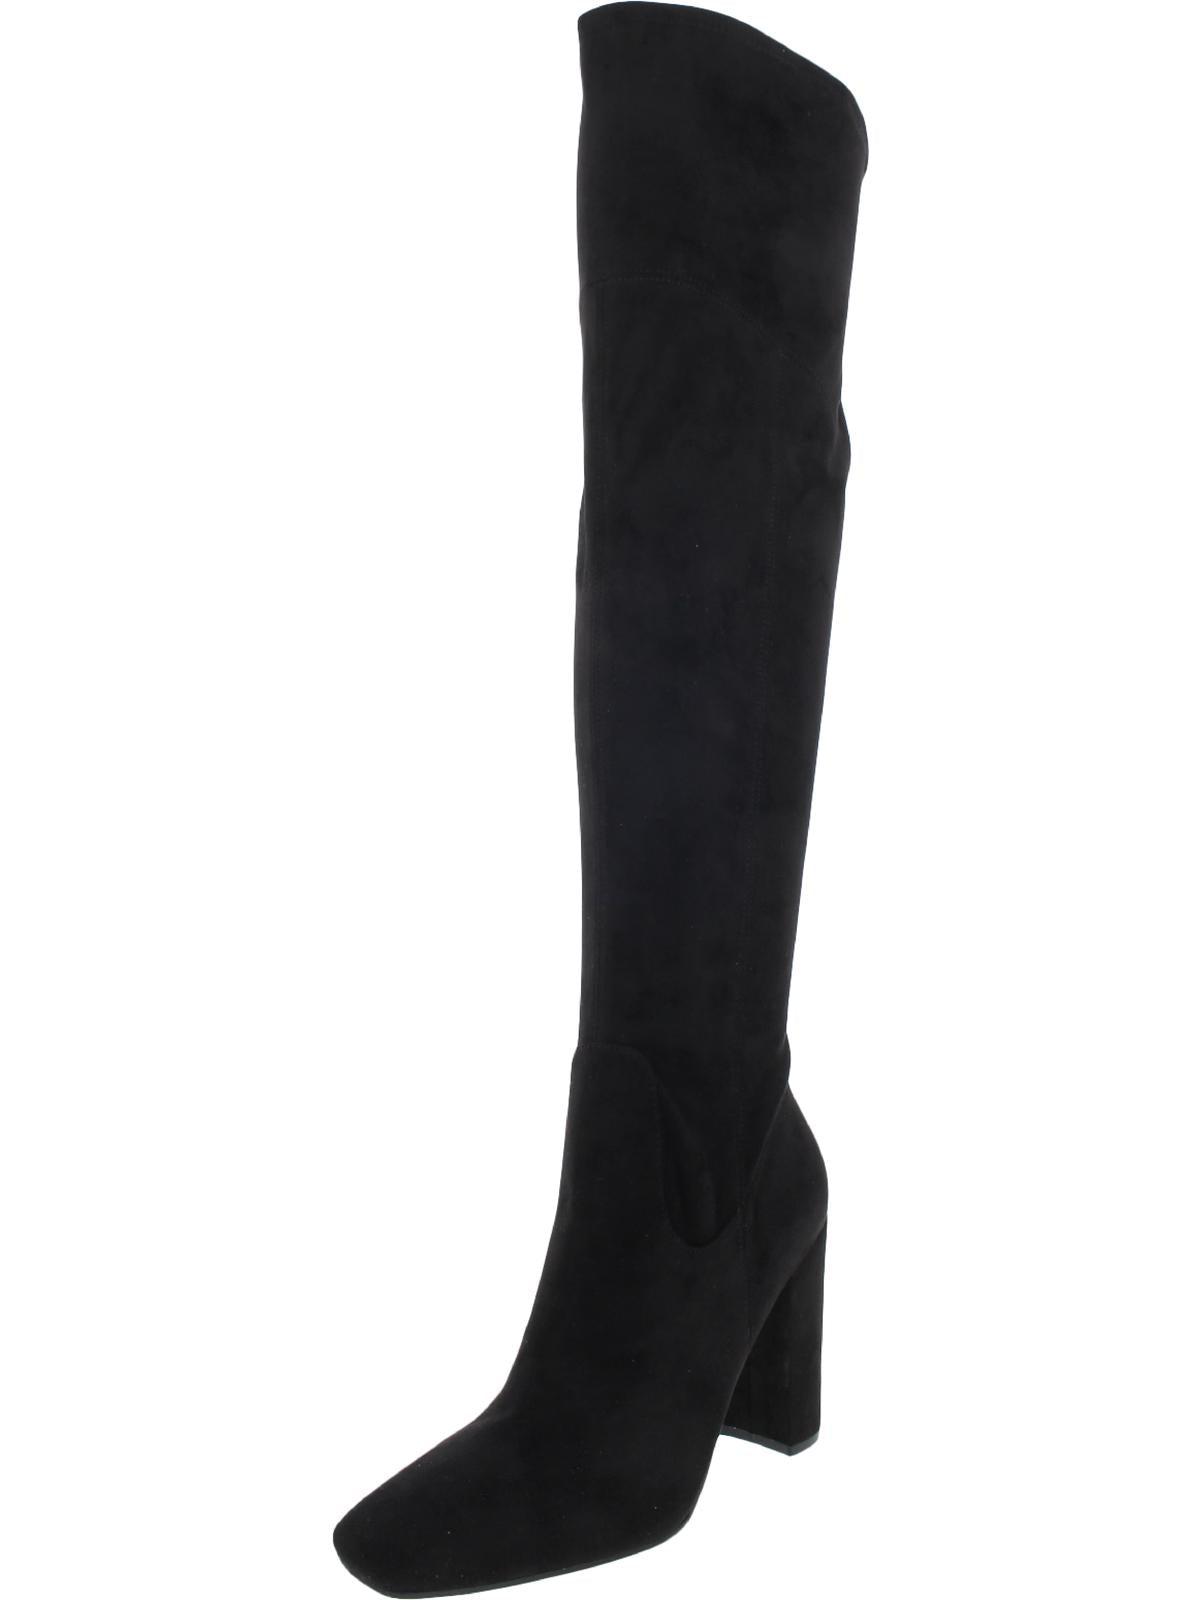 Guess Mireya Faux Suede Tall Knee-high Boots in Black | Lyst